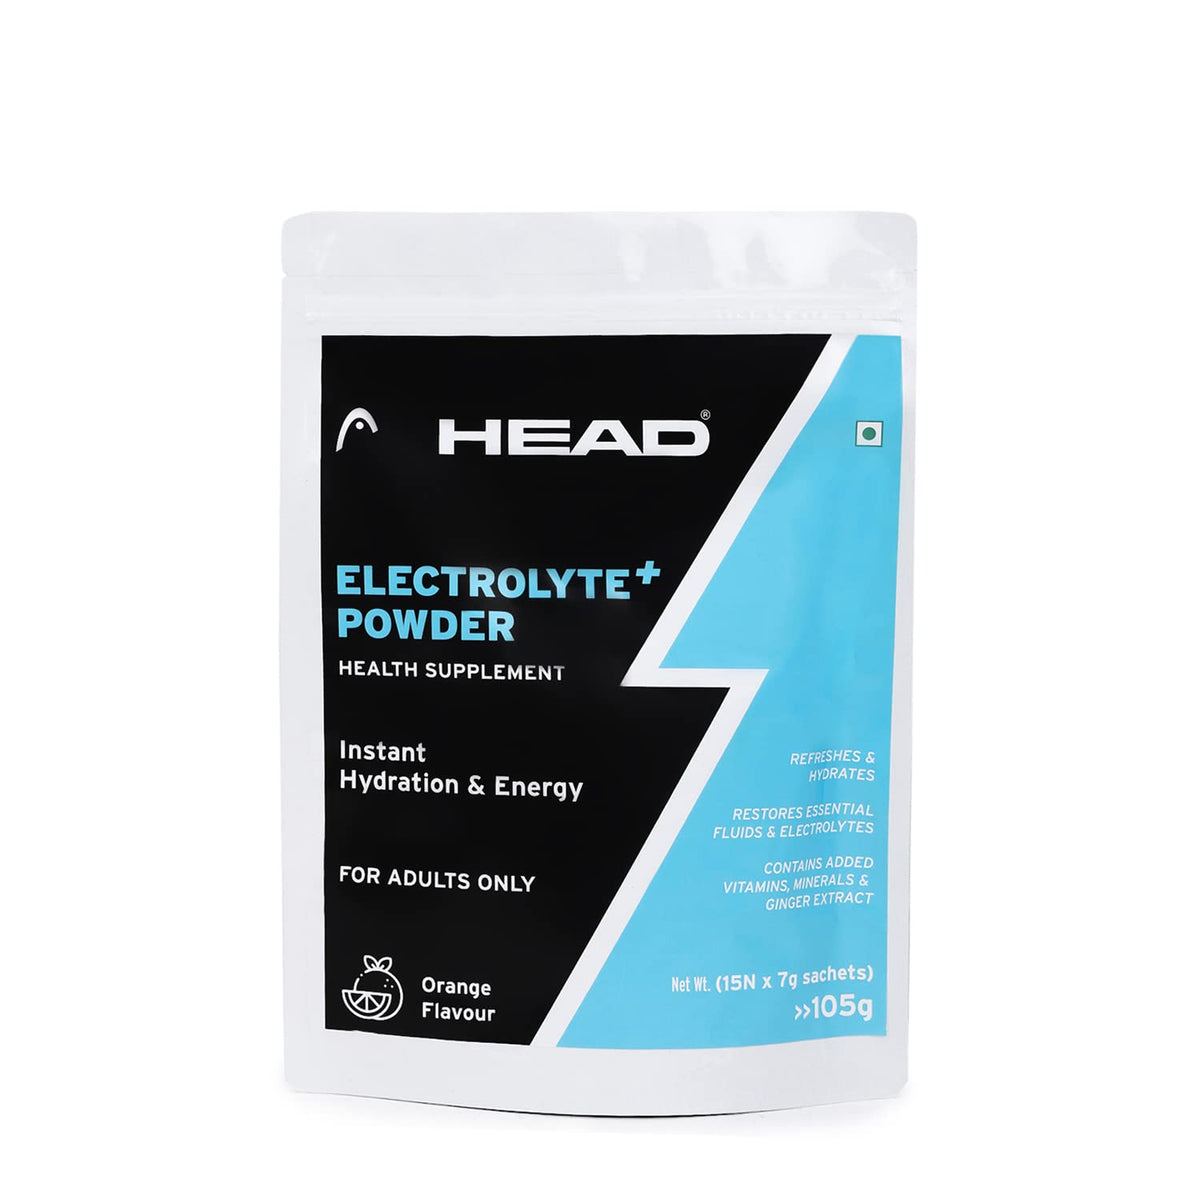 Head Electrolyte - 237g Oral Rehydration Powder with 5 Vital Ingredients Sodium, Potassium, Magnesium, Vitamin C and Vitamin D| Orange Flavor |For Quick Hydration and Energy | Instant Hydration